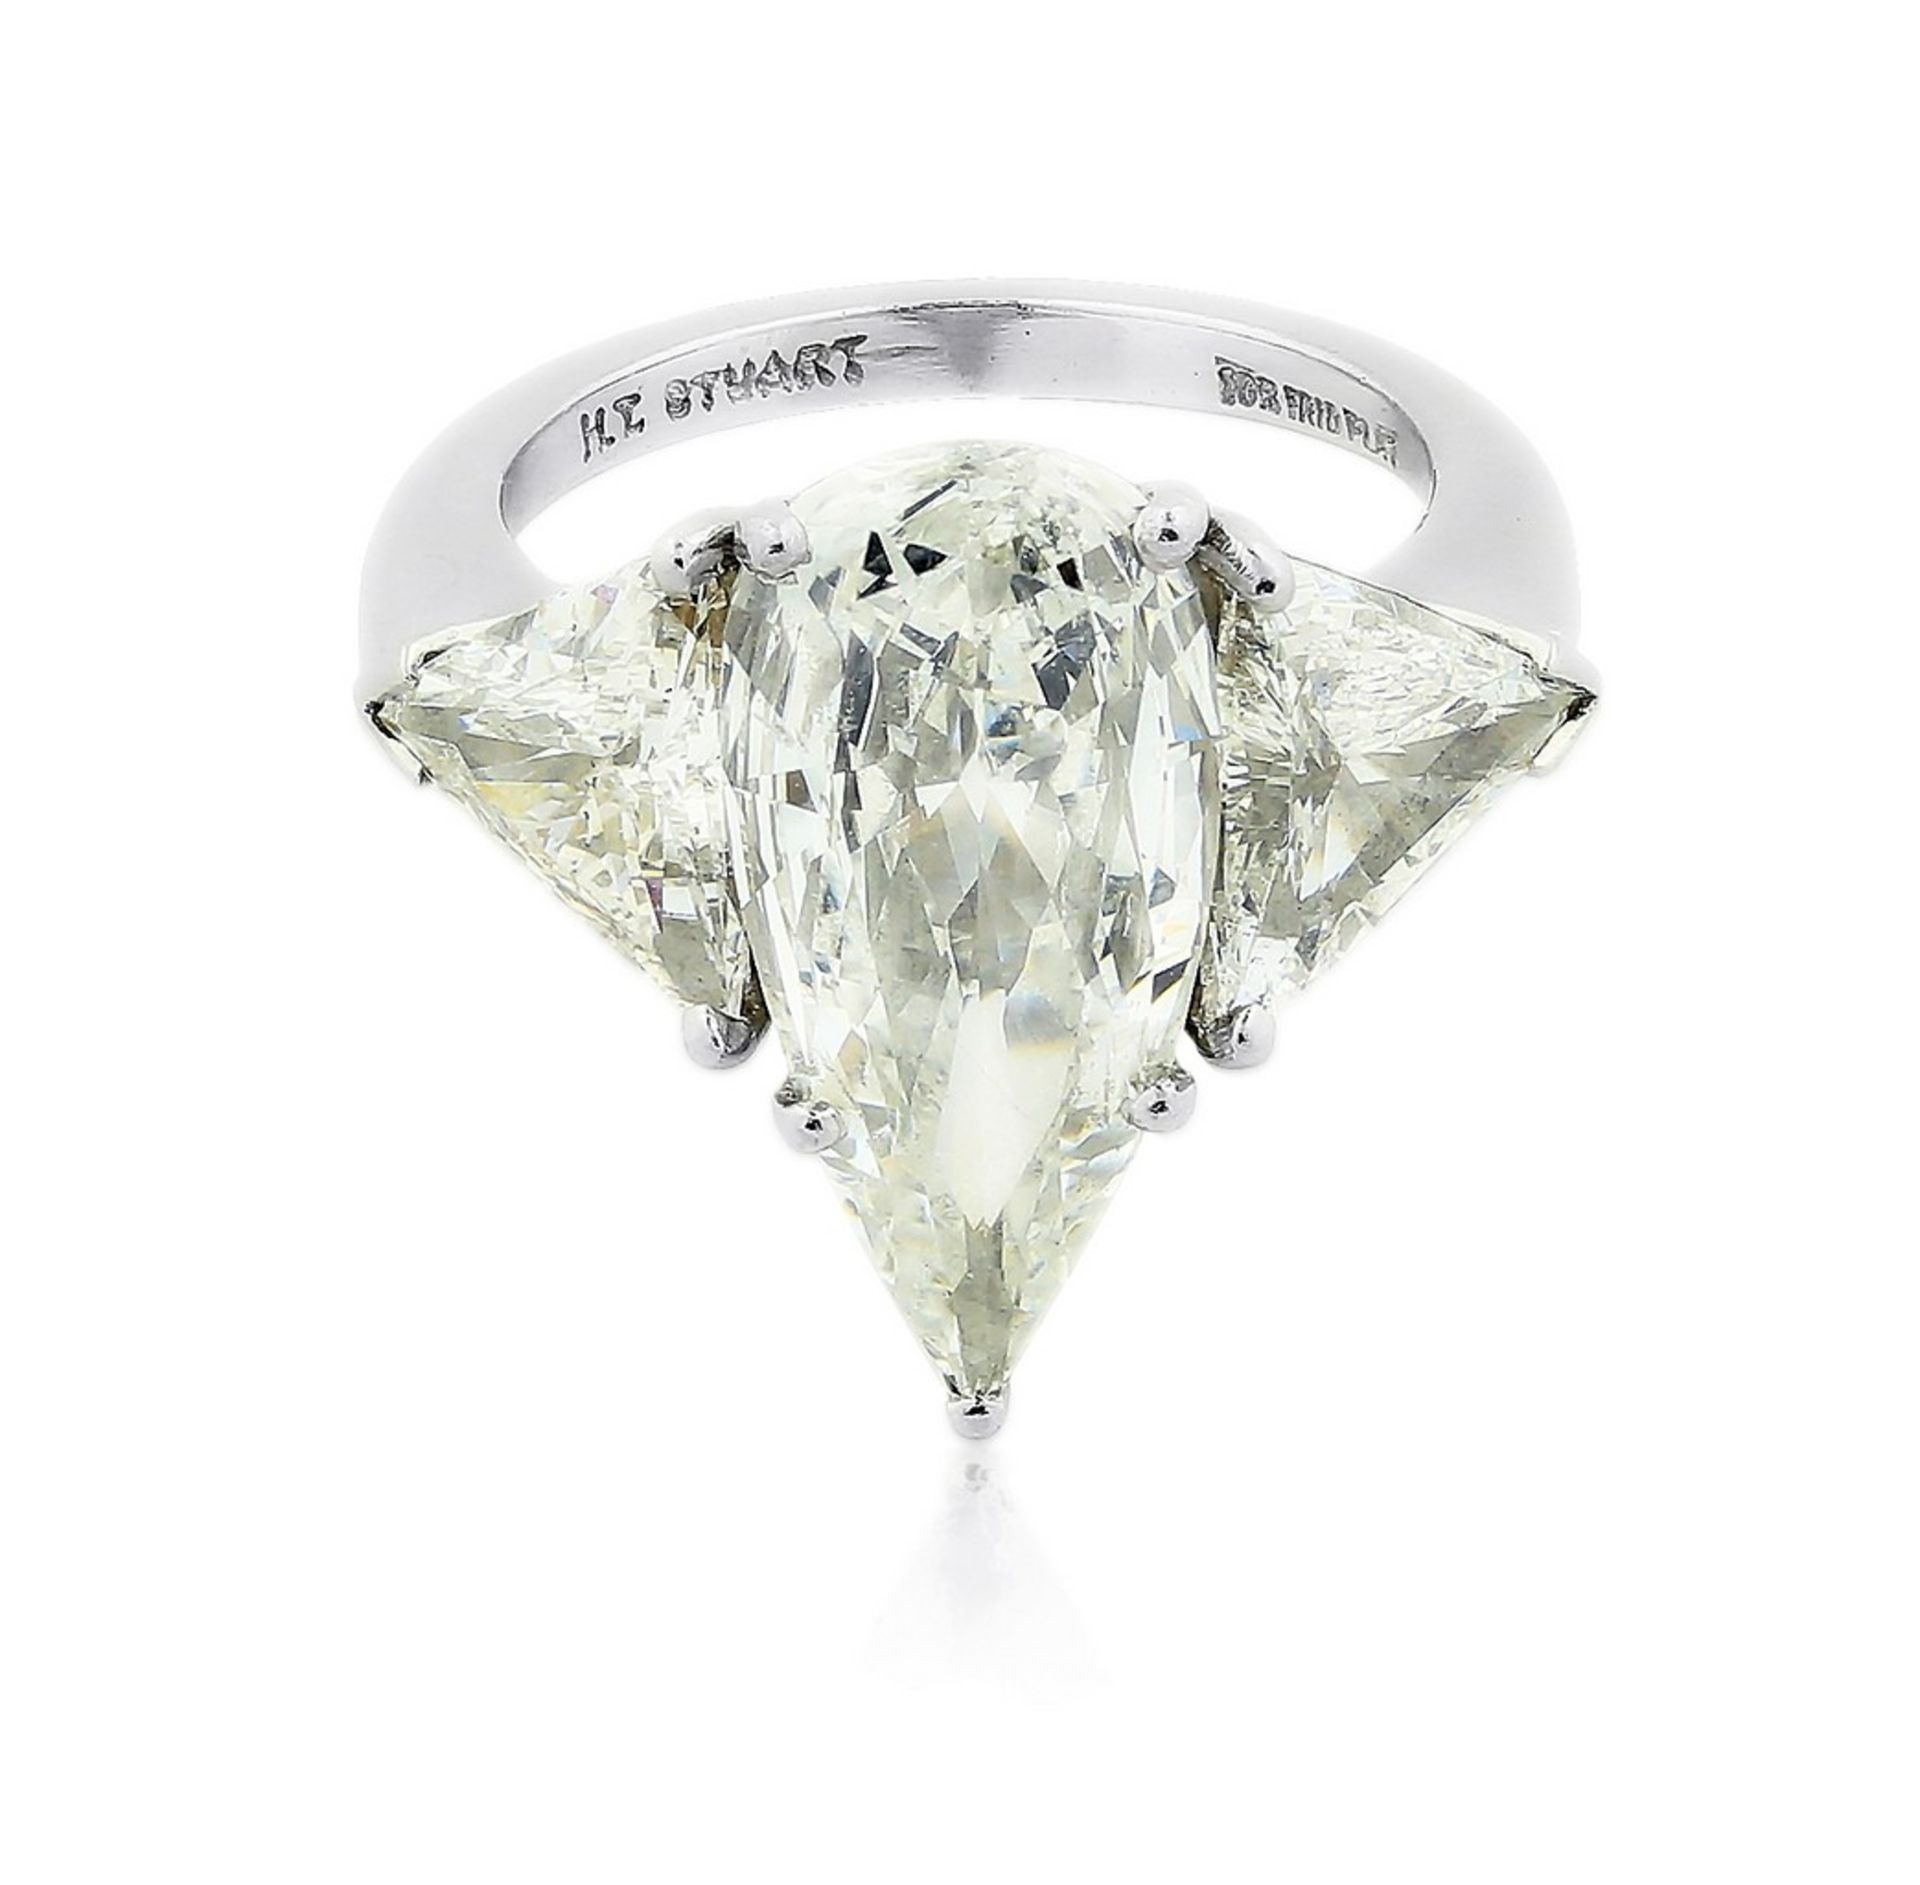 4.01 CARAT DIAMOND PLATINUM RING Centered by a pear-shaped diamond weighing 4.01 carats, flanked